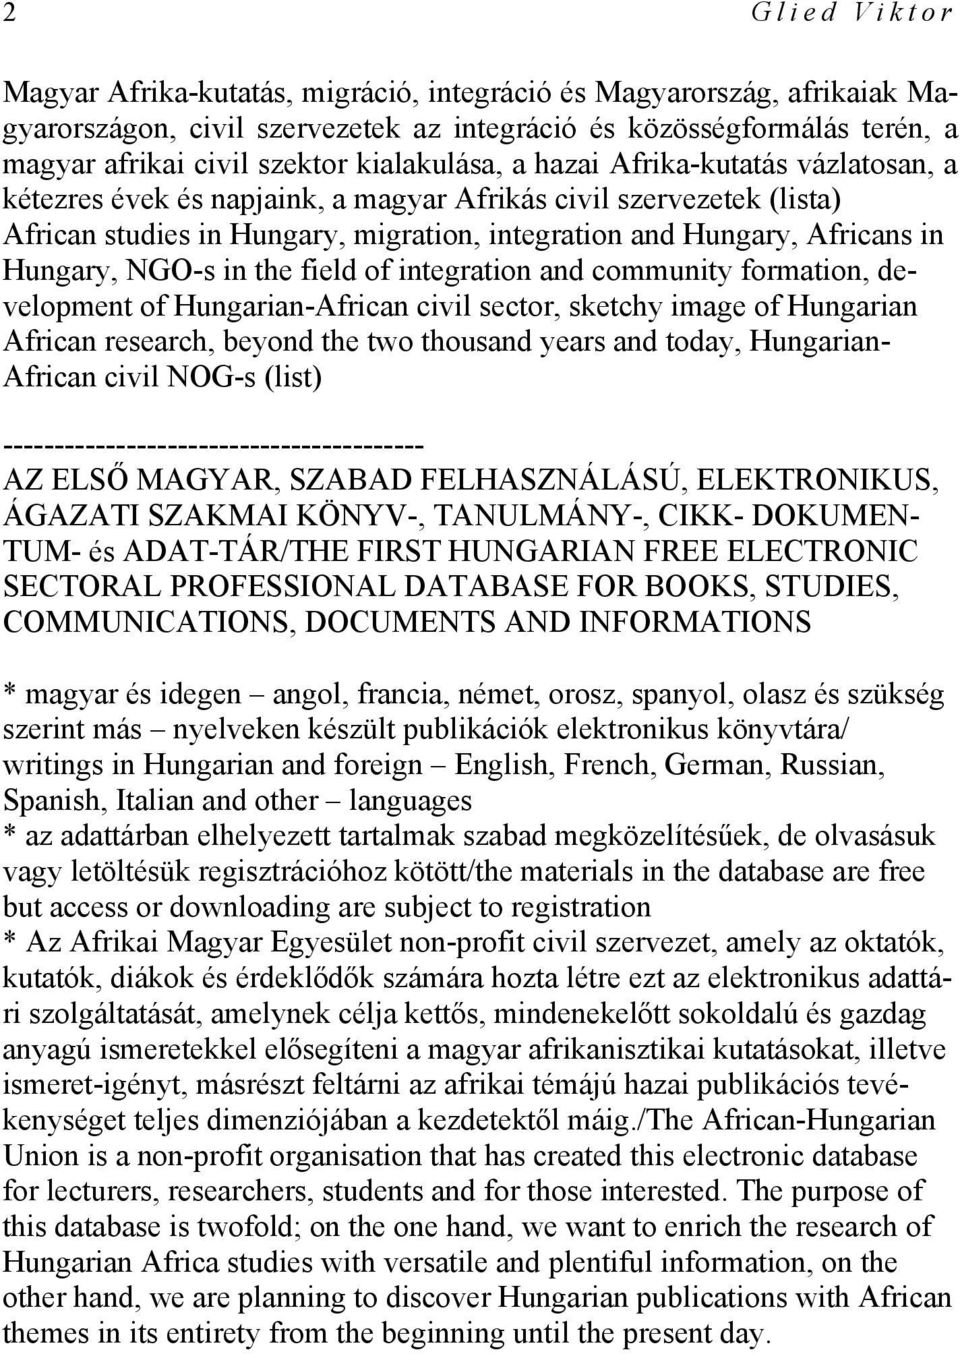 Hungary, NGO-s in the field of integration and community formation, development of Hungarian-African civil sector, sketchy image of Hungarian African research, beyond the two thousand years and